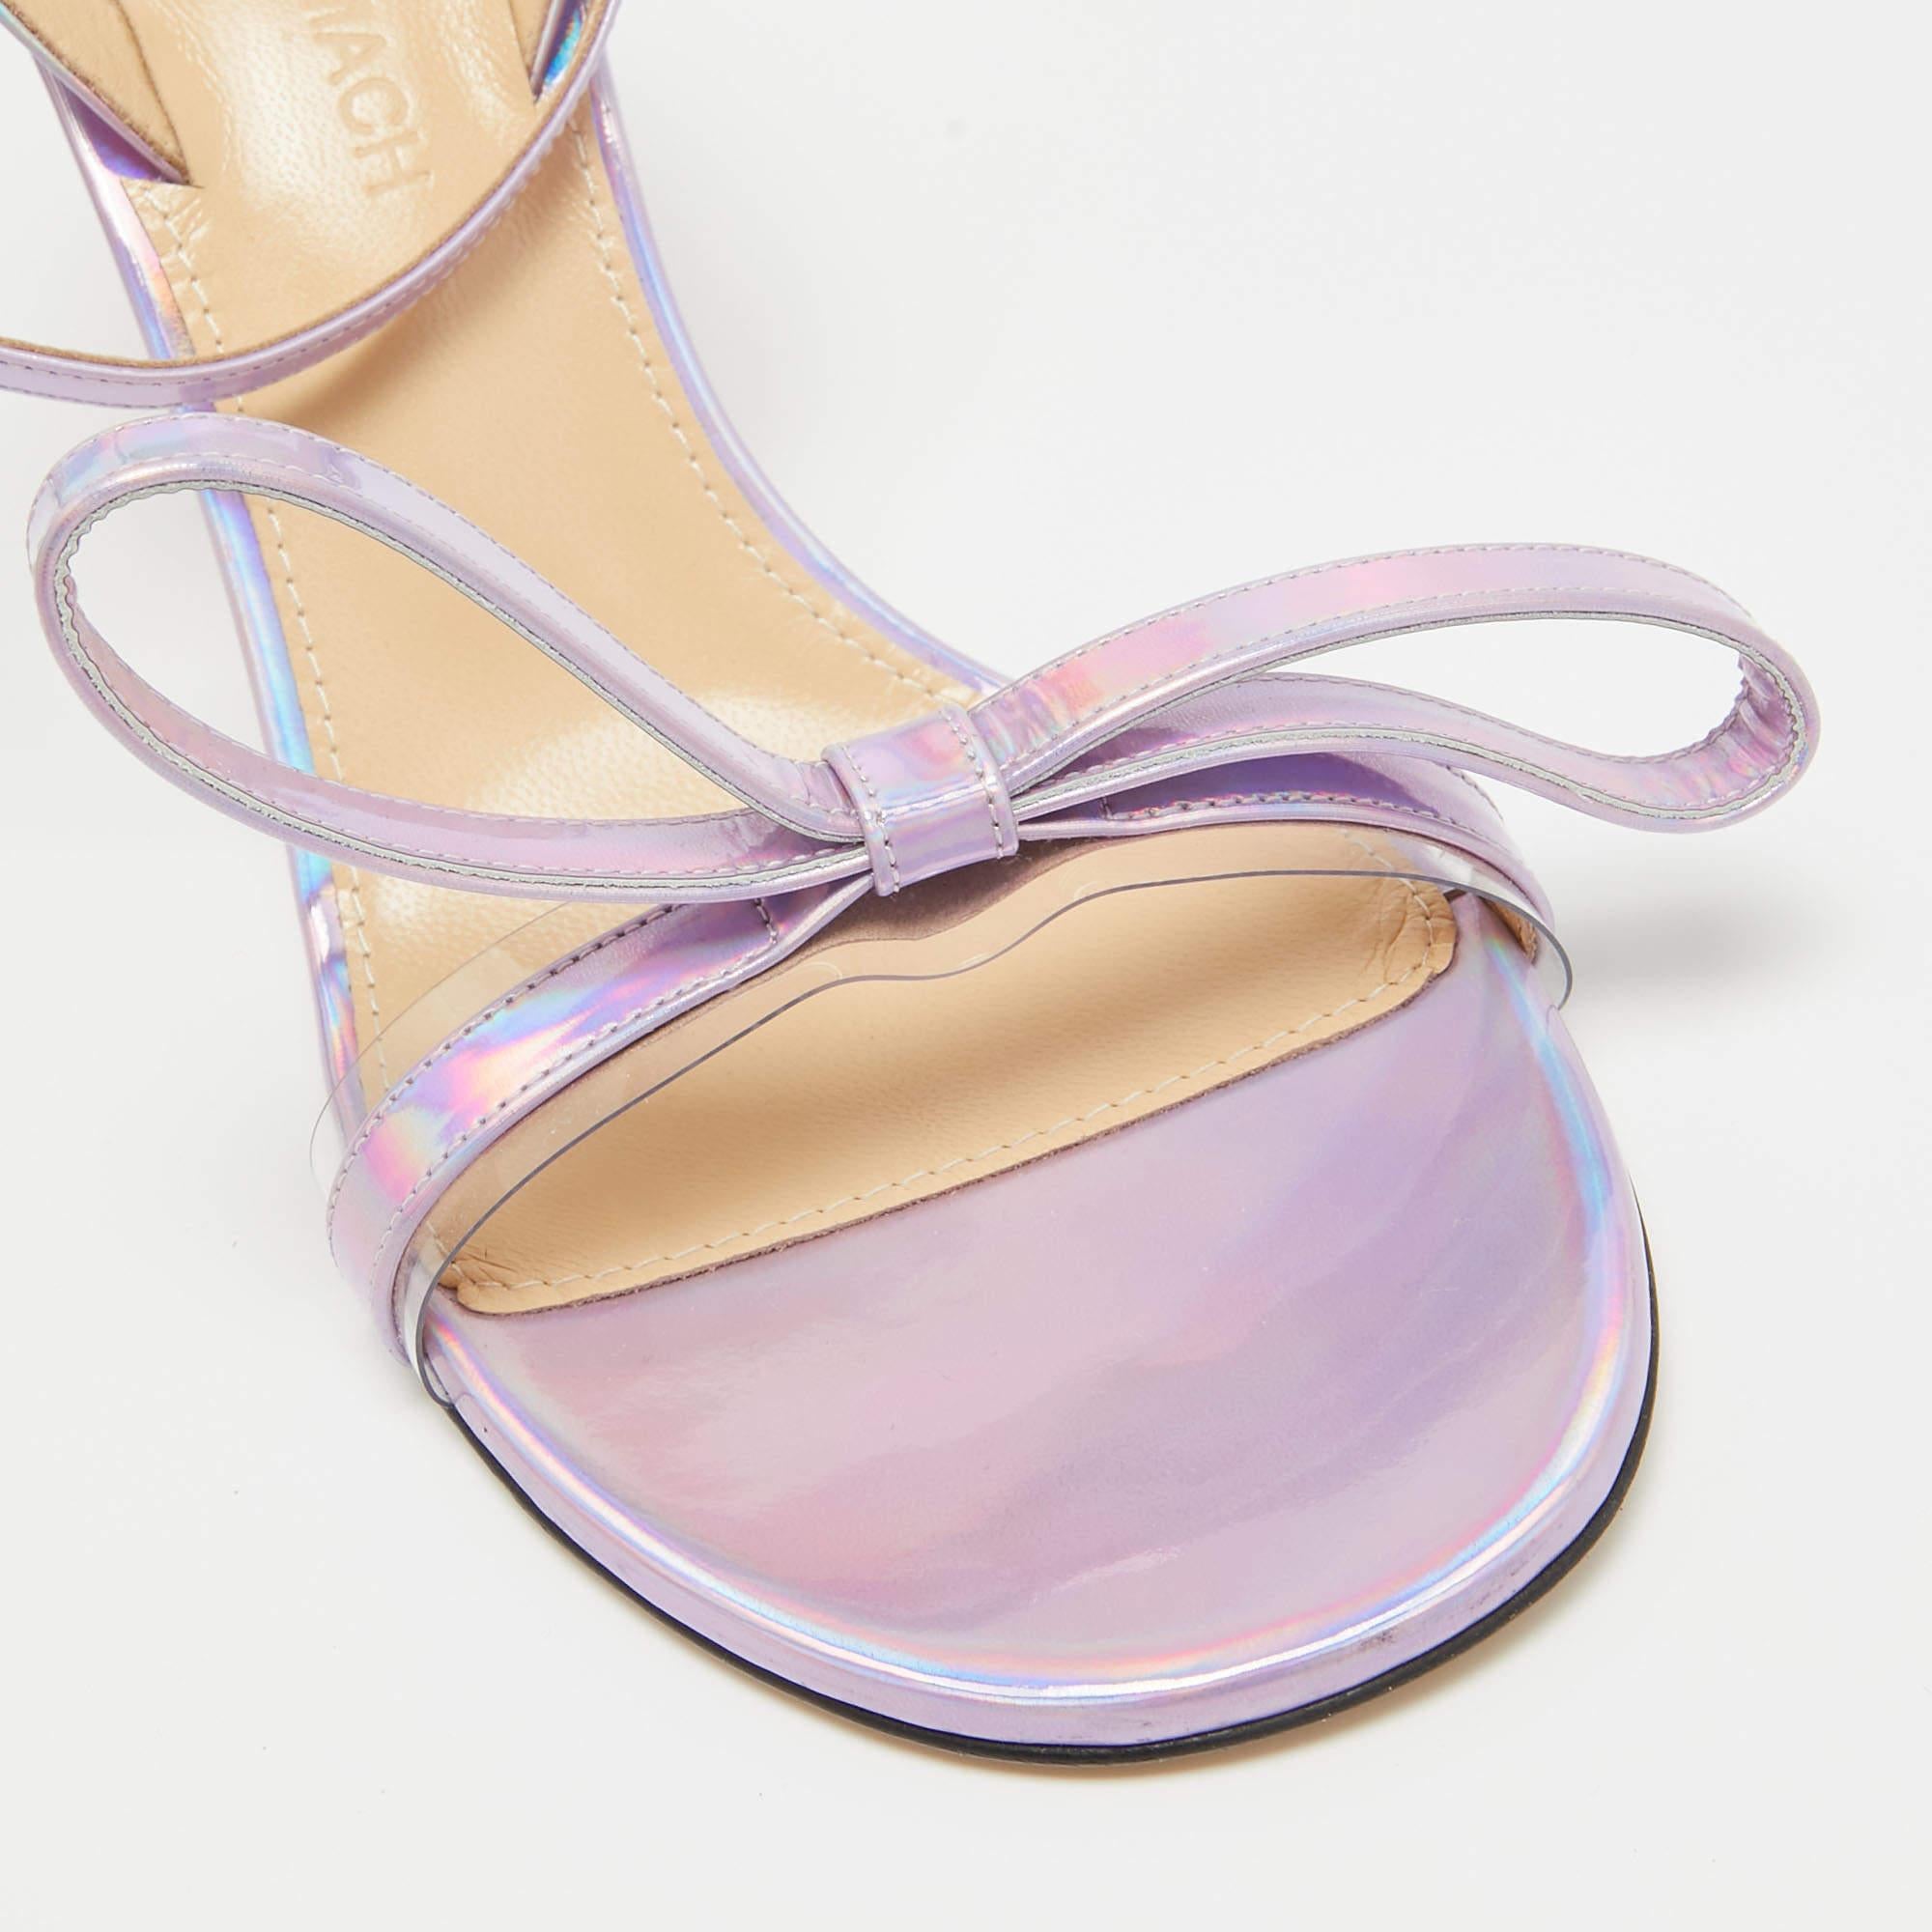 Mach & Mach Purple Iridescent Leather French Bow Sandals Size 38.5 For Sale 3